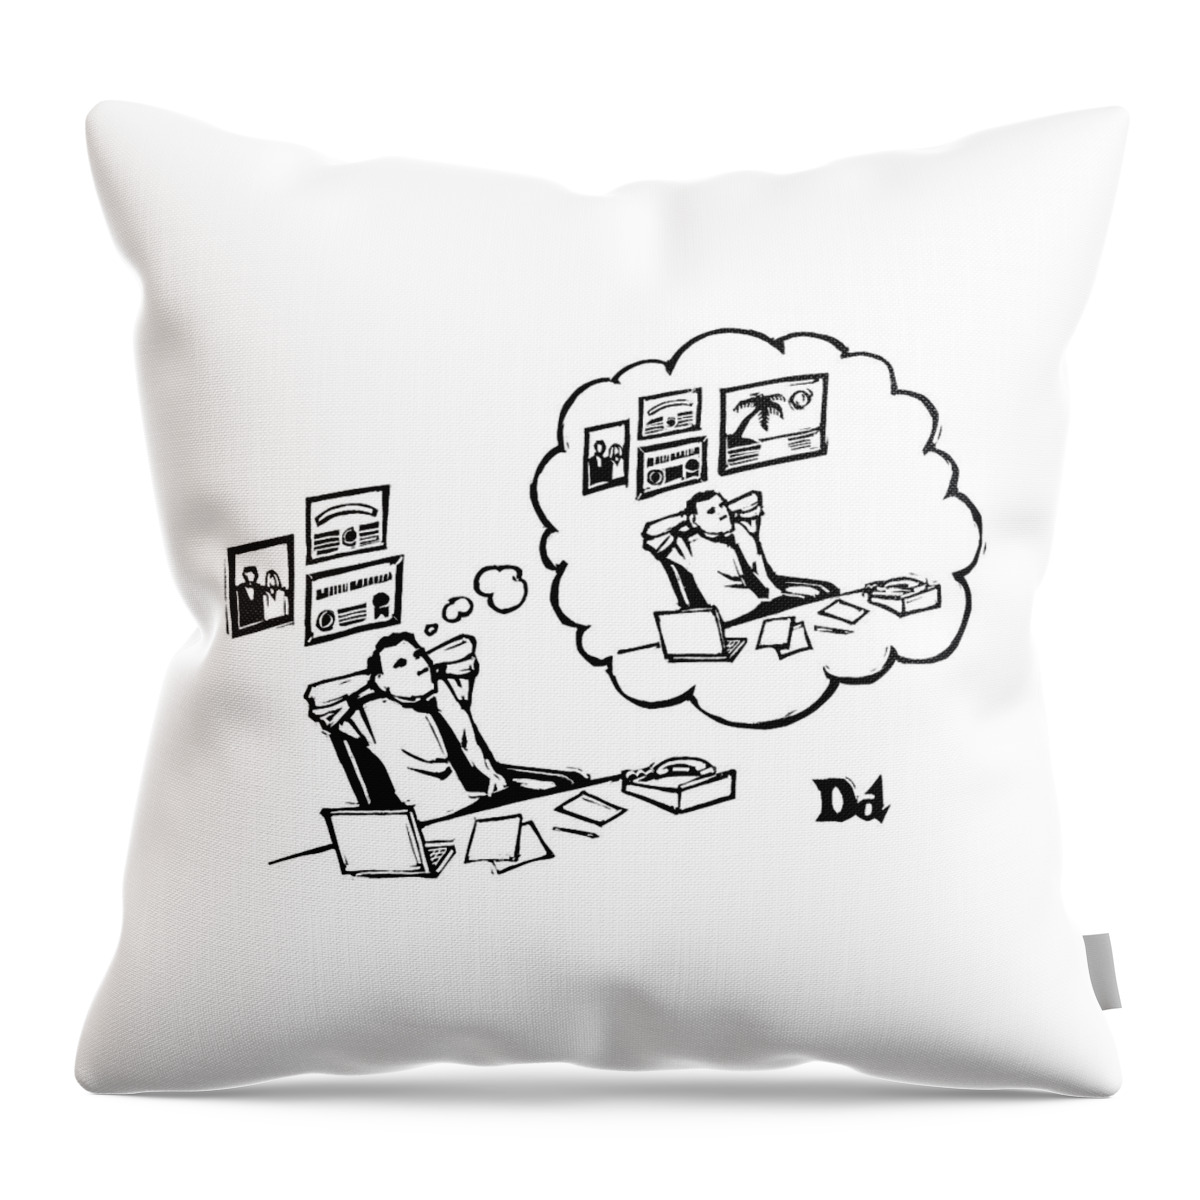 A Man Sitting At A Desk Imagines Himself Sitting Throw Pillow